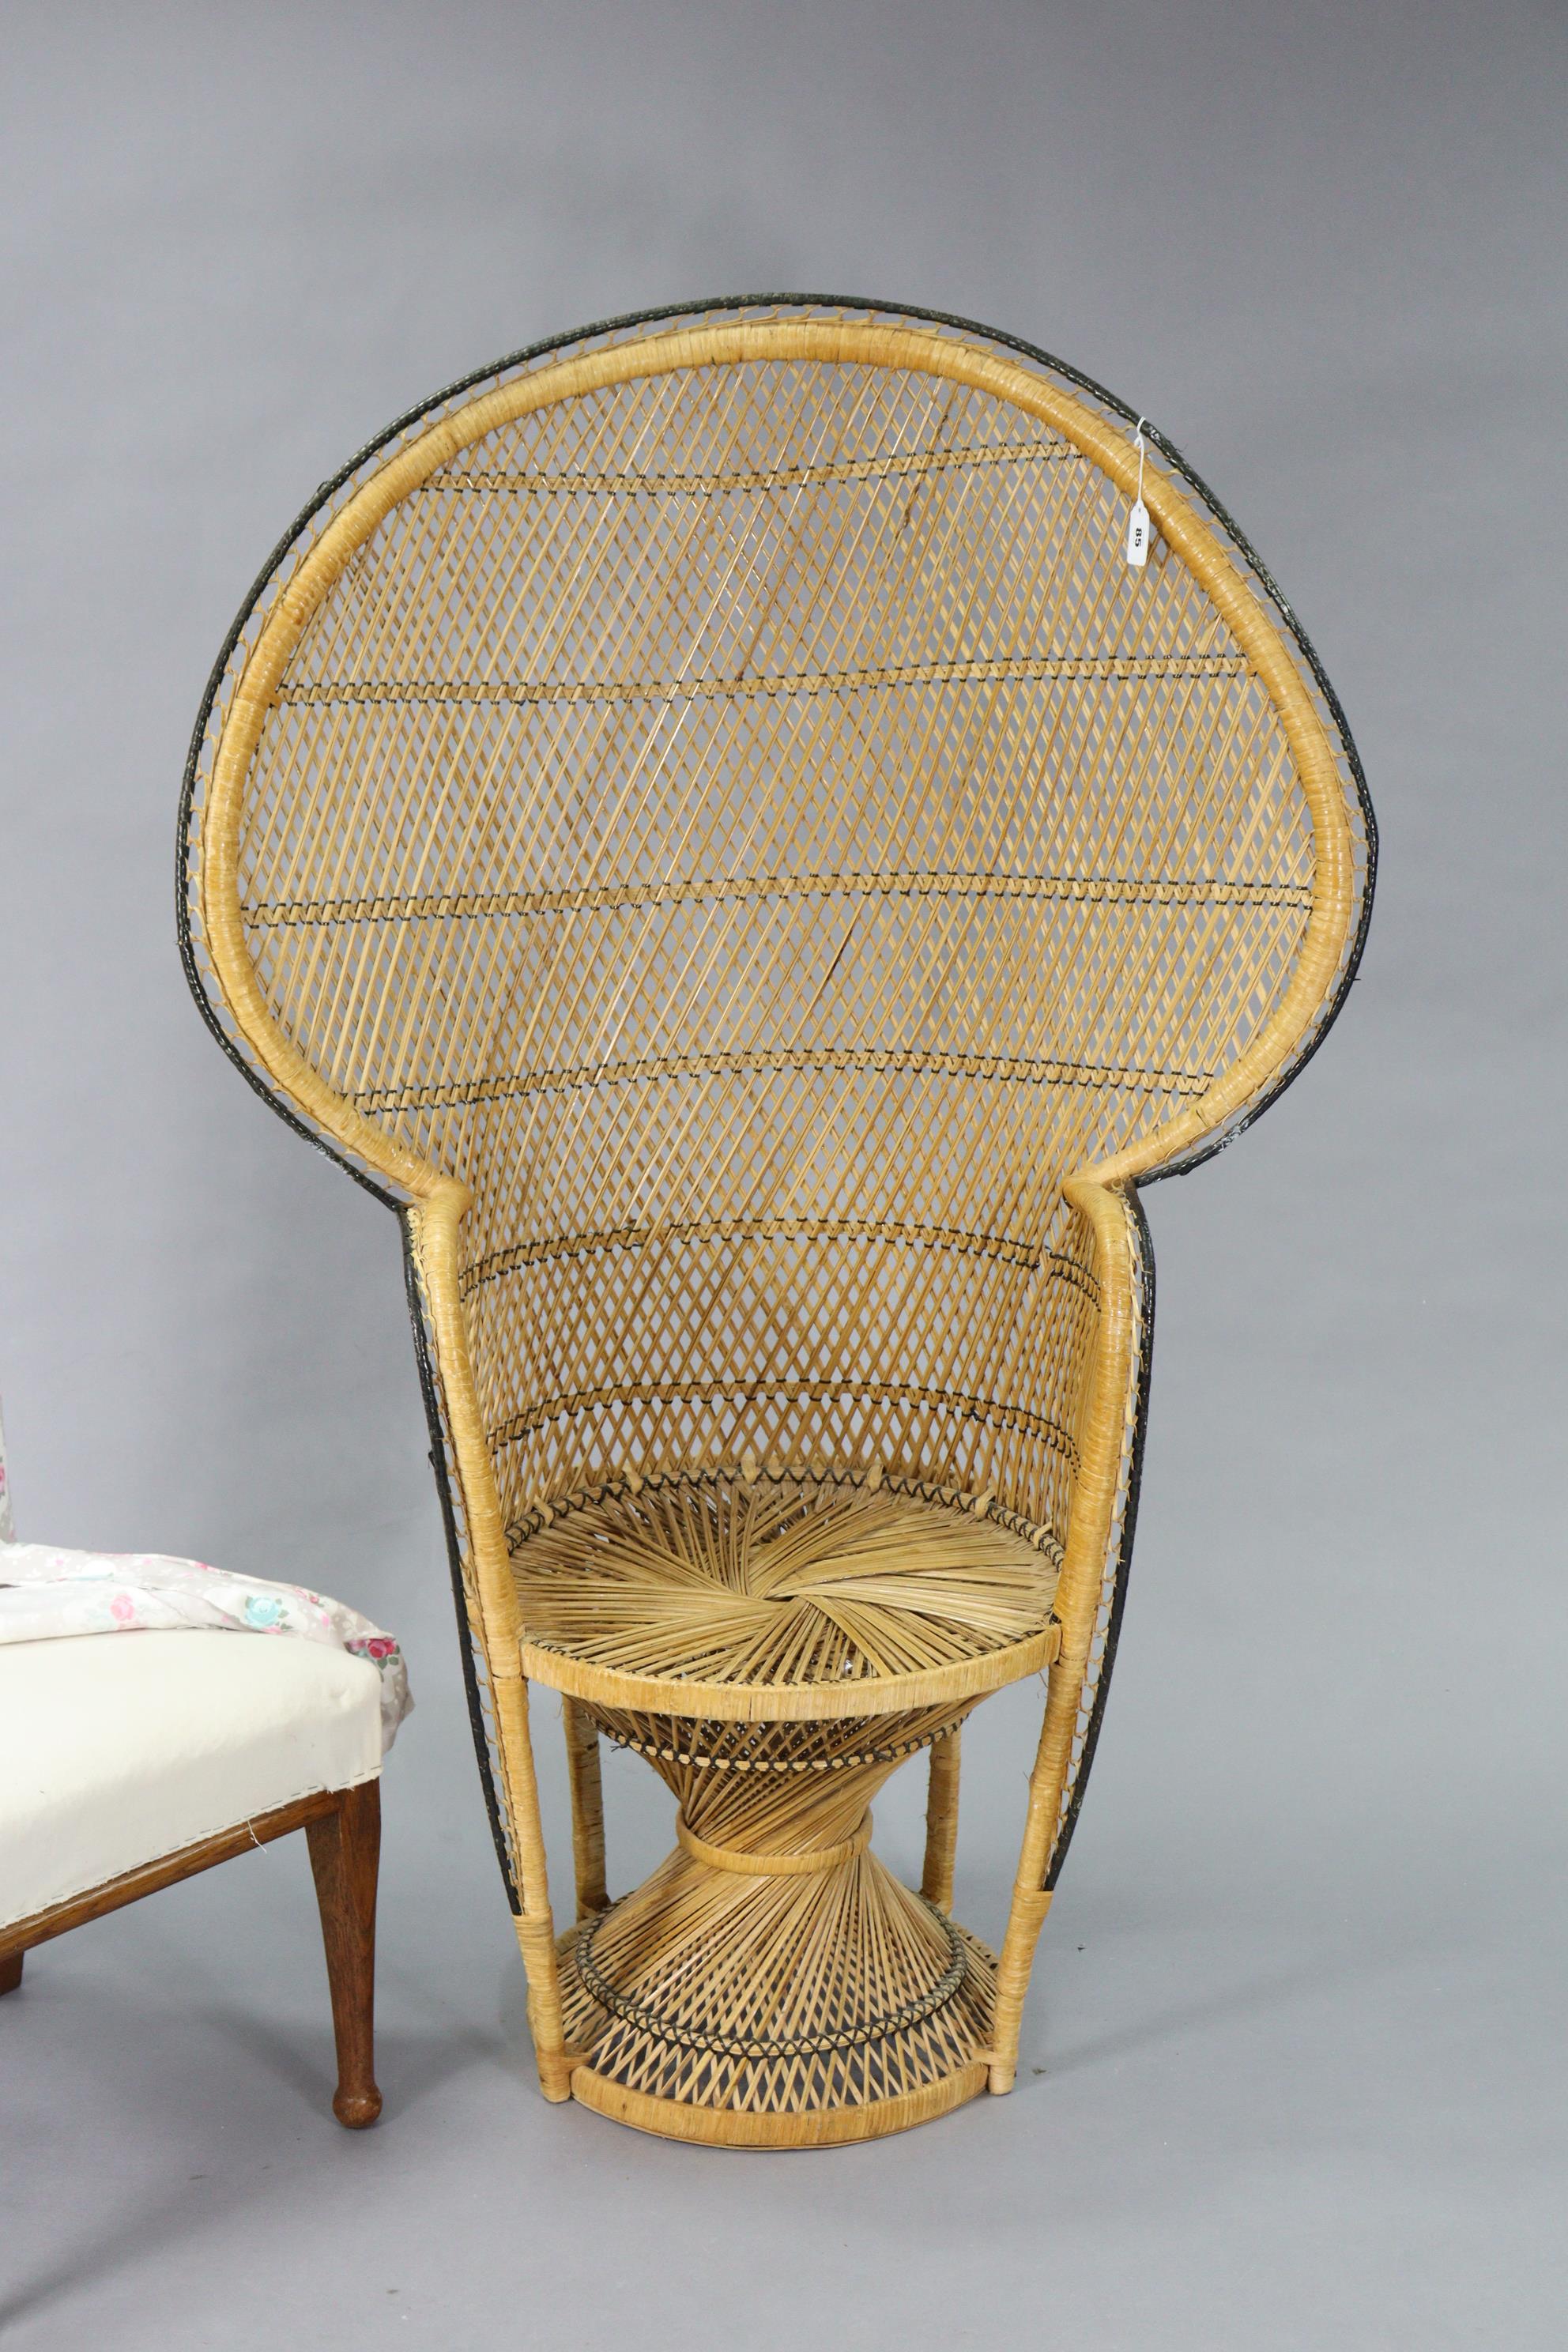 A vintage wicker “Peacock” chair; & a nursing chair. - Image 2 of 3